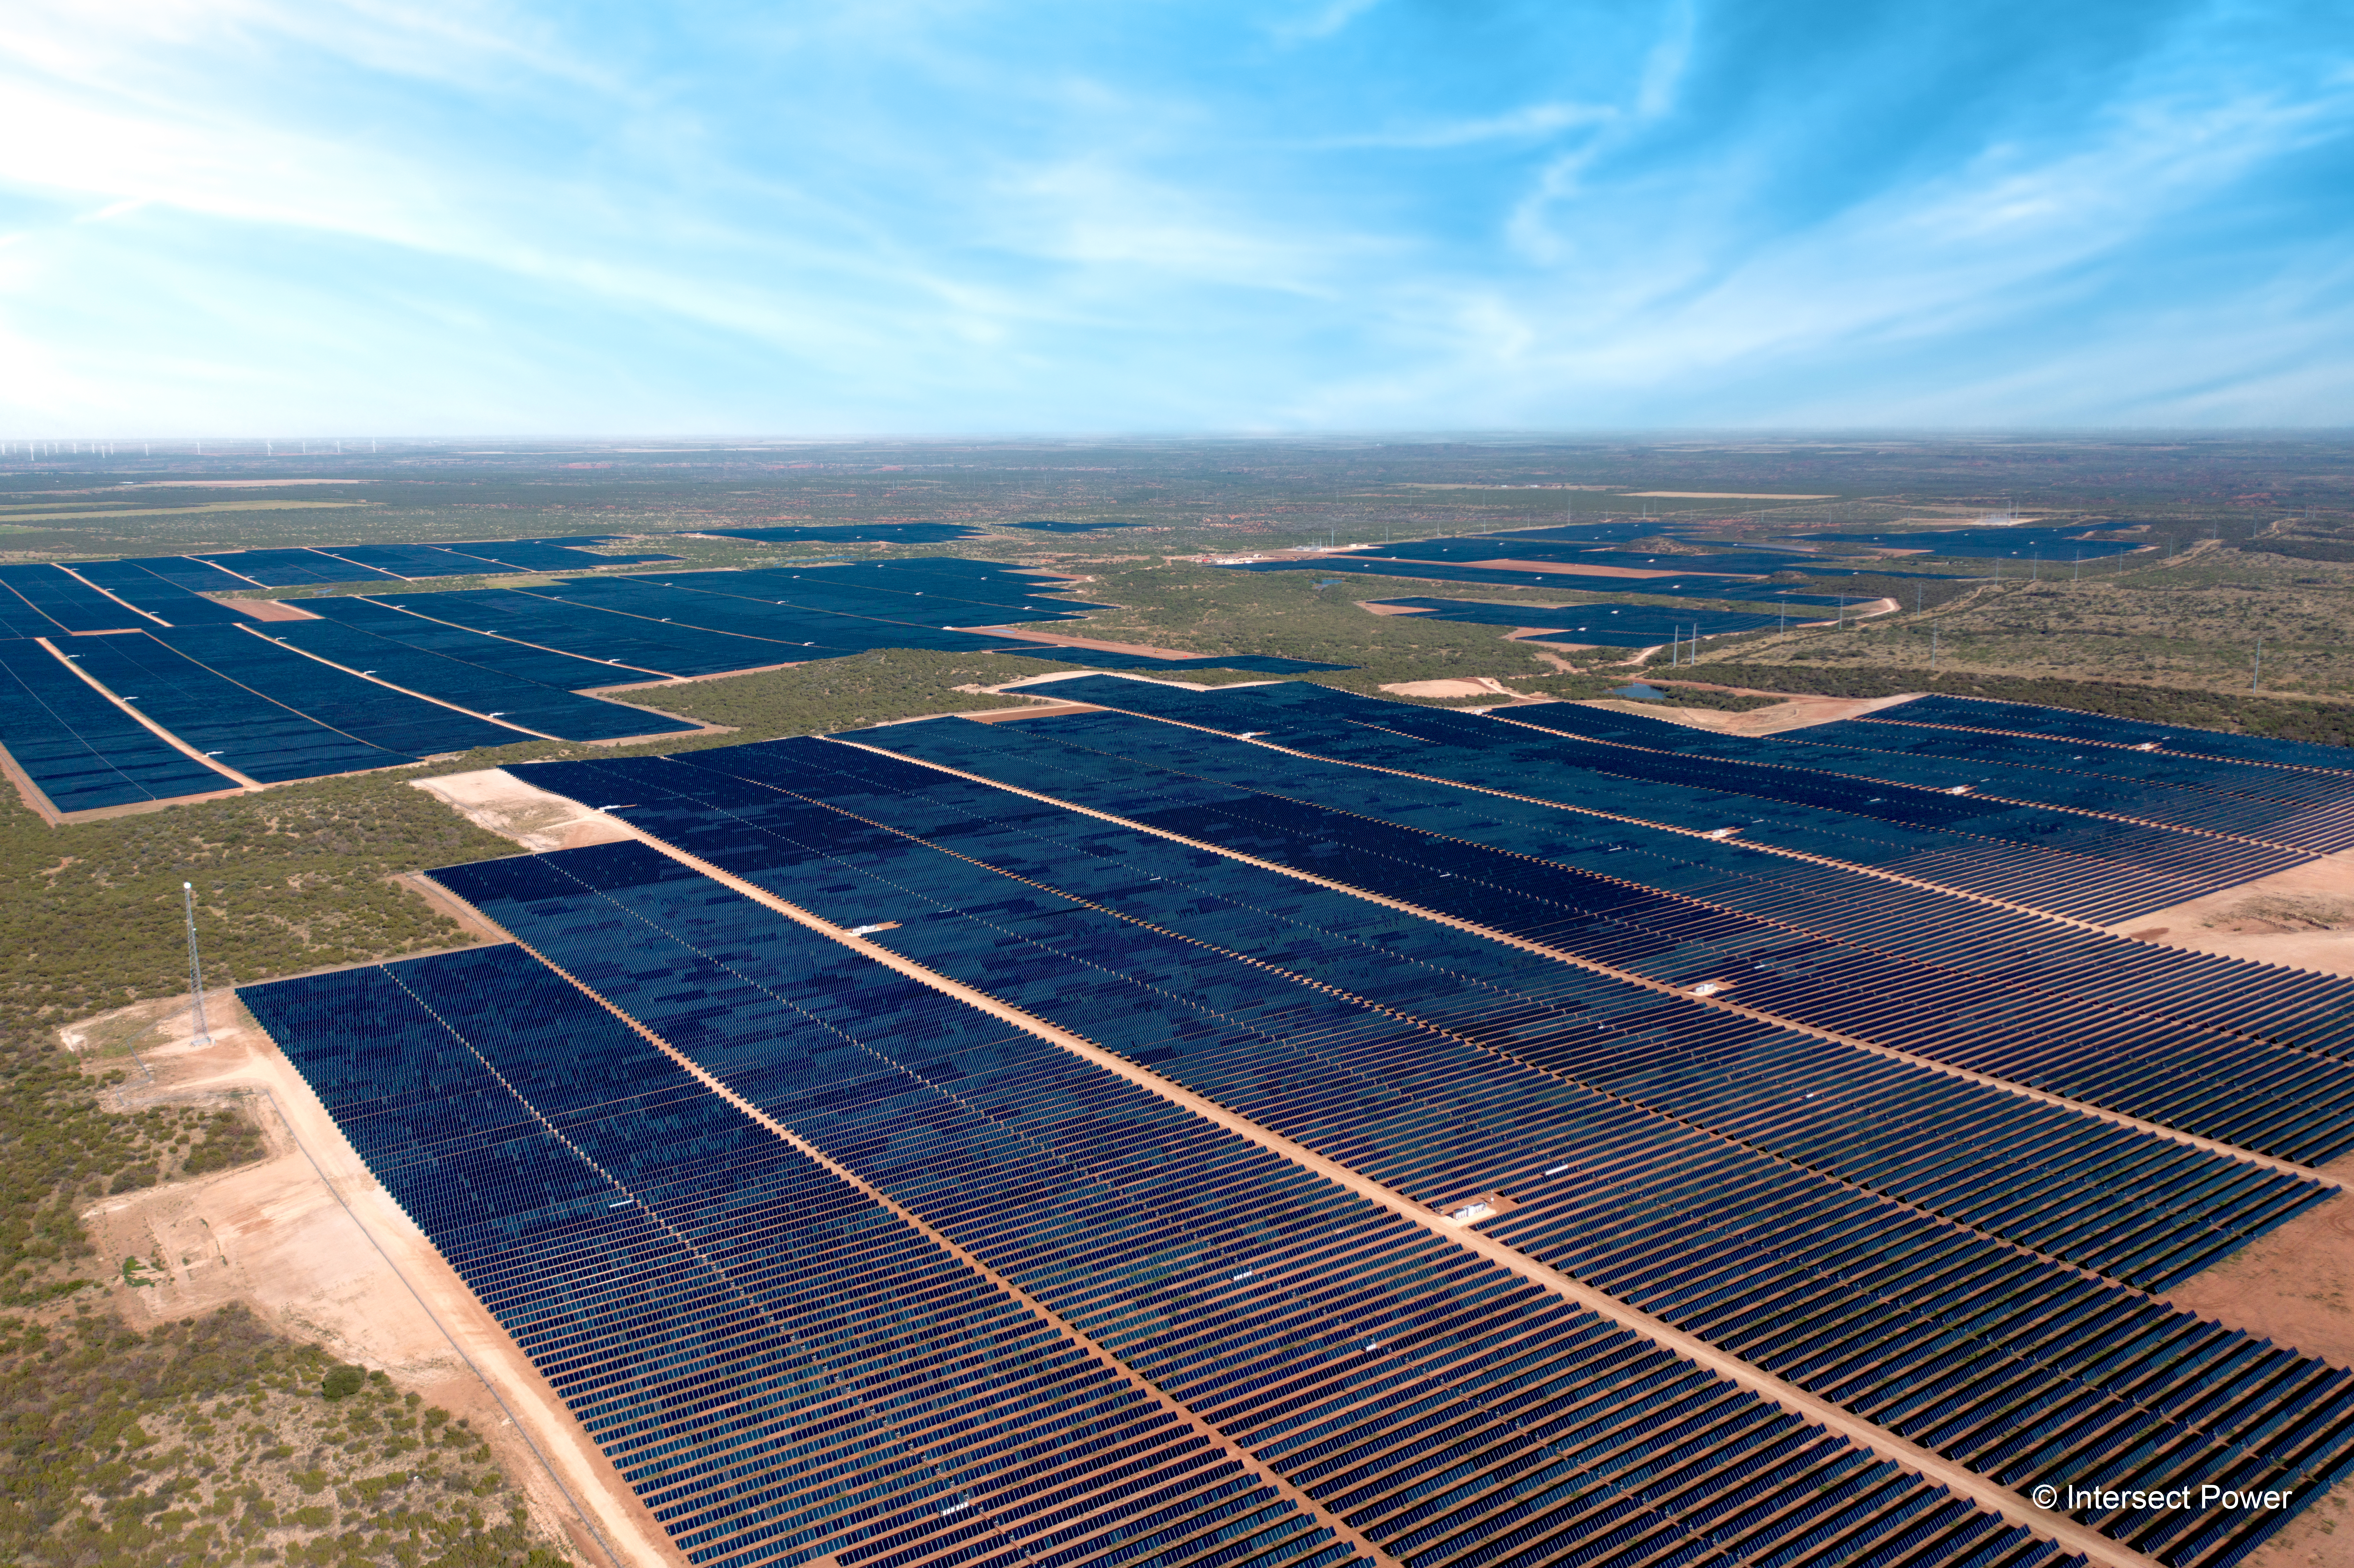 Intersect Power’s 828 MWp Texas solar project begins commercial operation